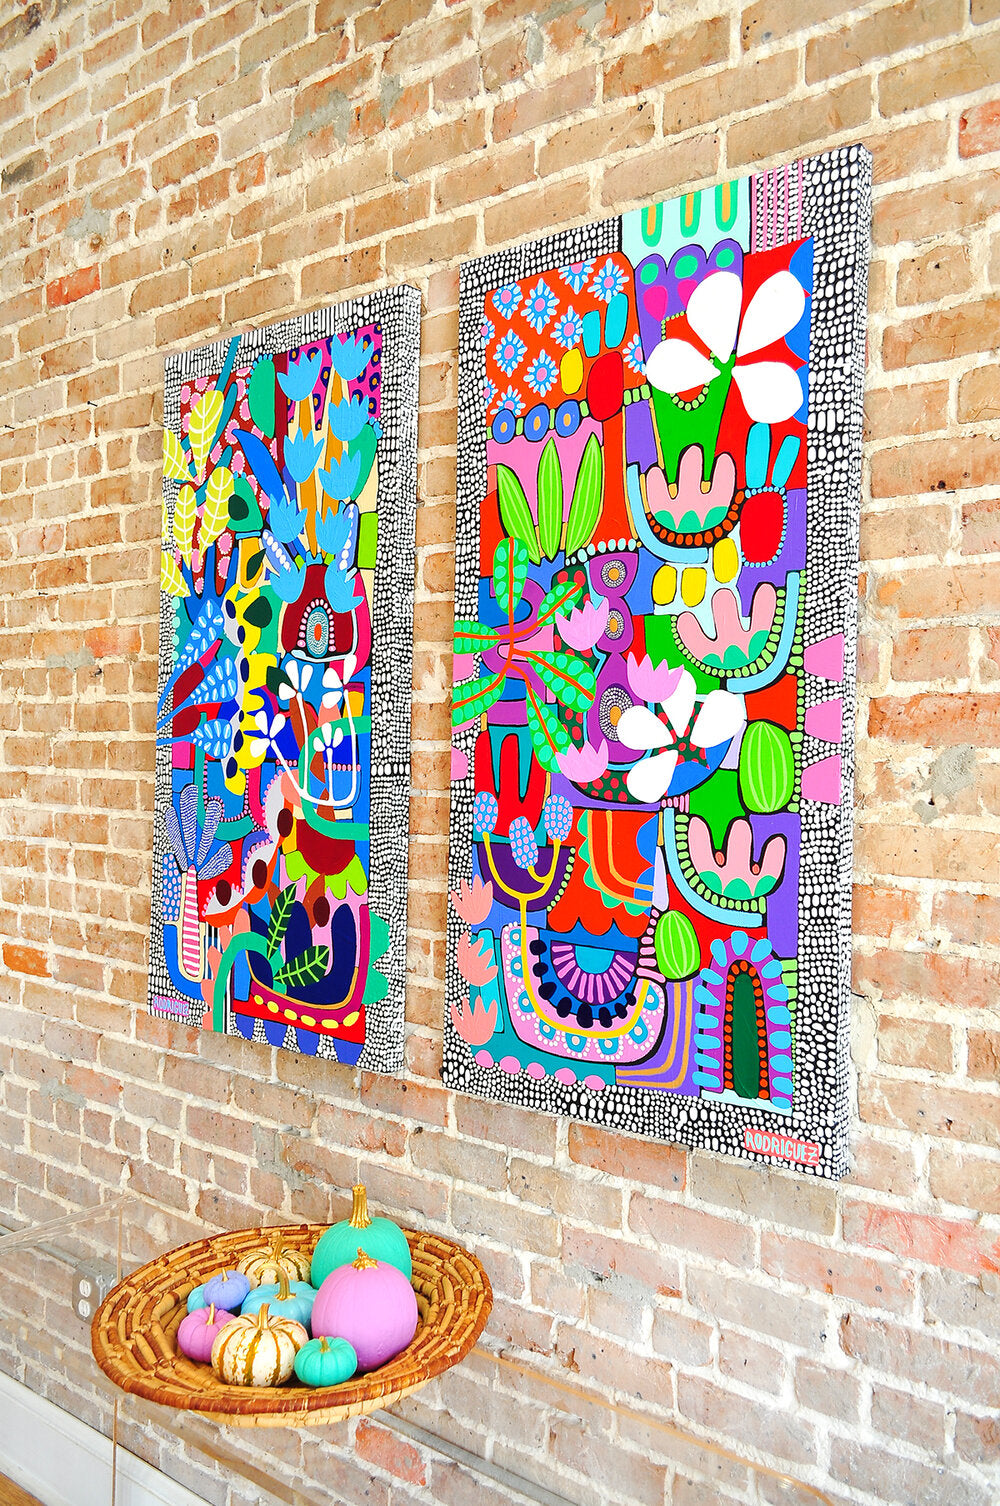 PLAYING PUZZLES IN THE JUNGLE- DIPTYCH - 48x24 Each on Canvas